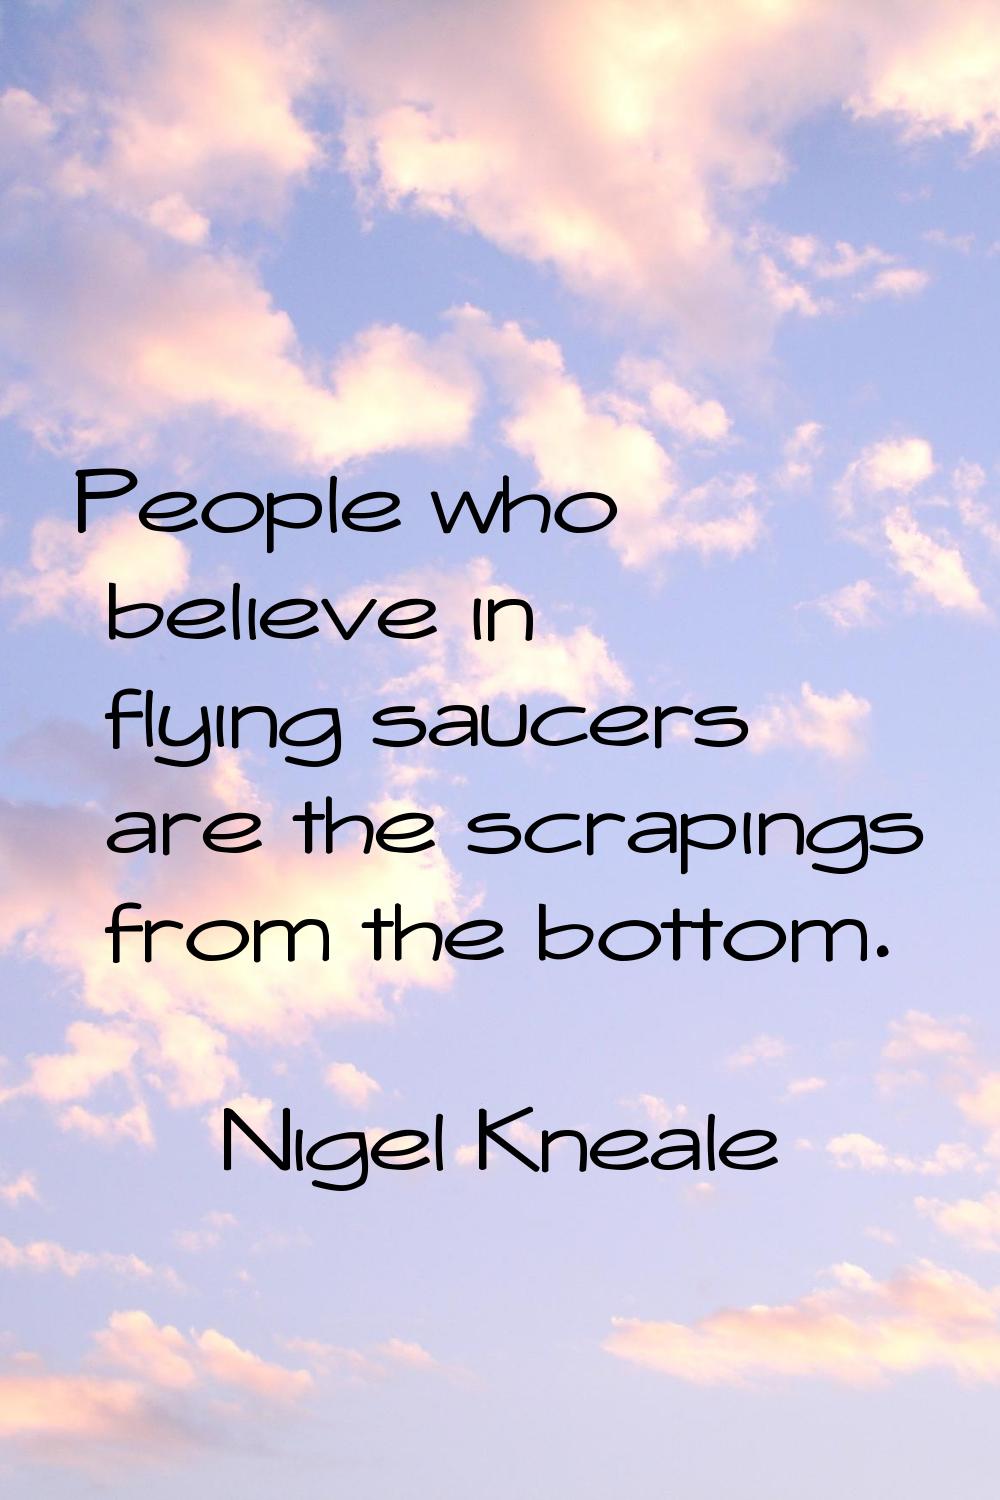 People who believe in flying saucers are the scrapings from the bottom.